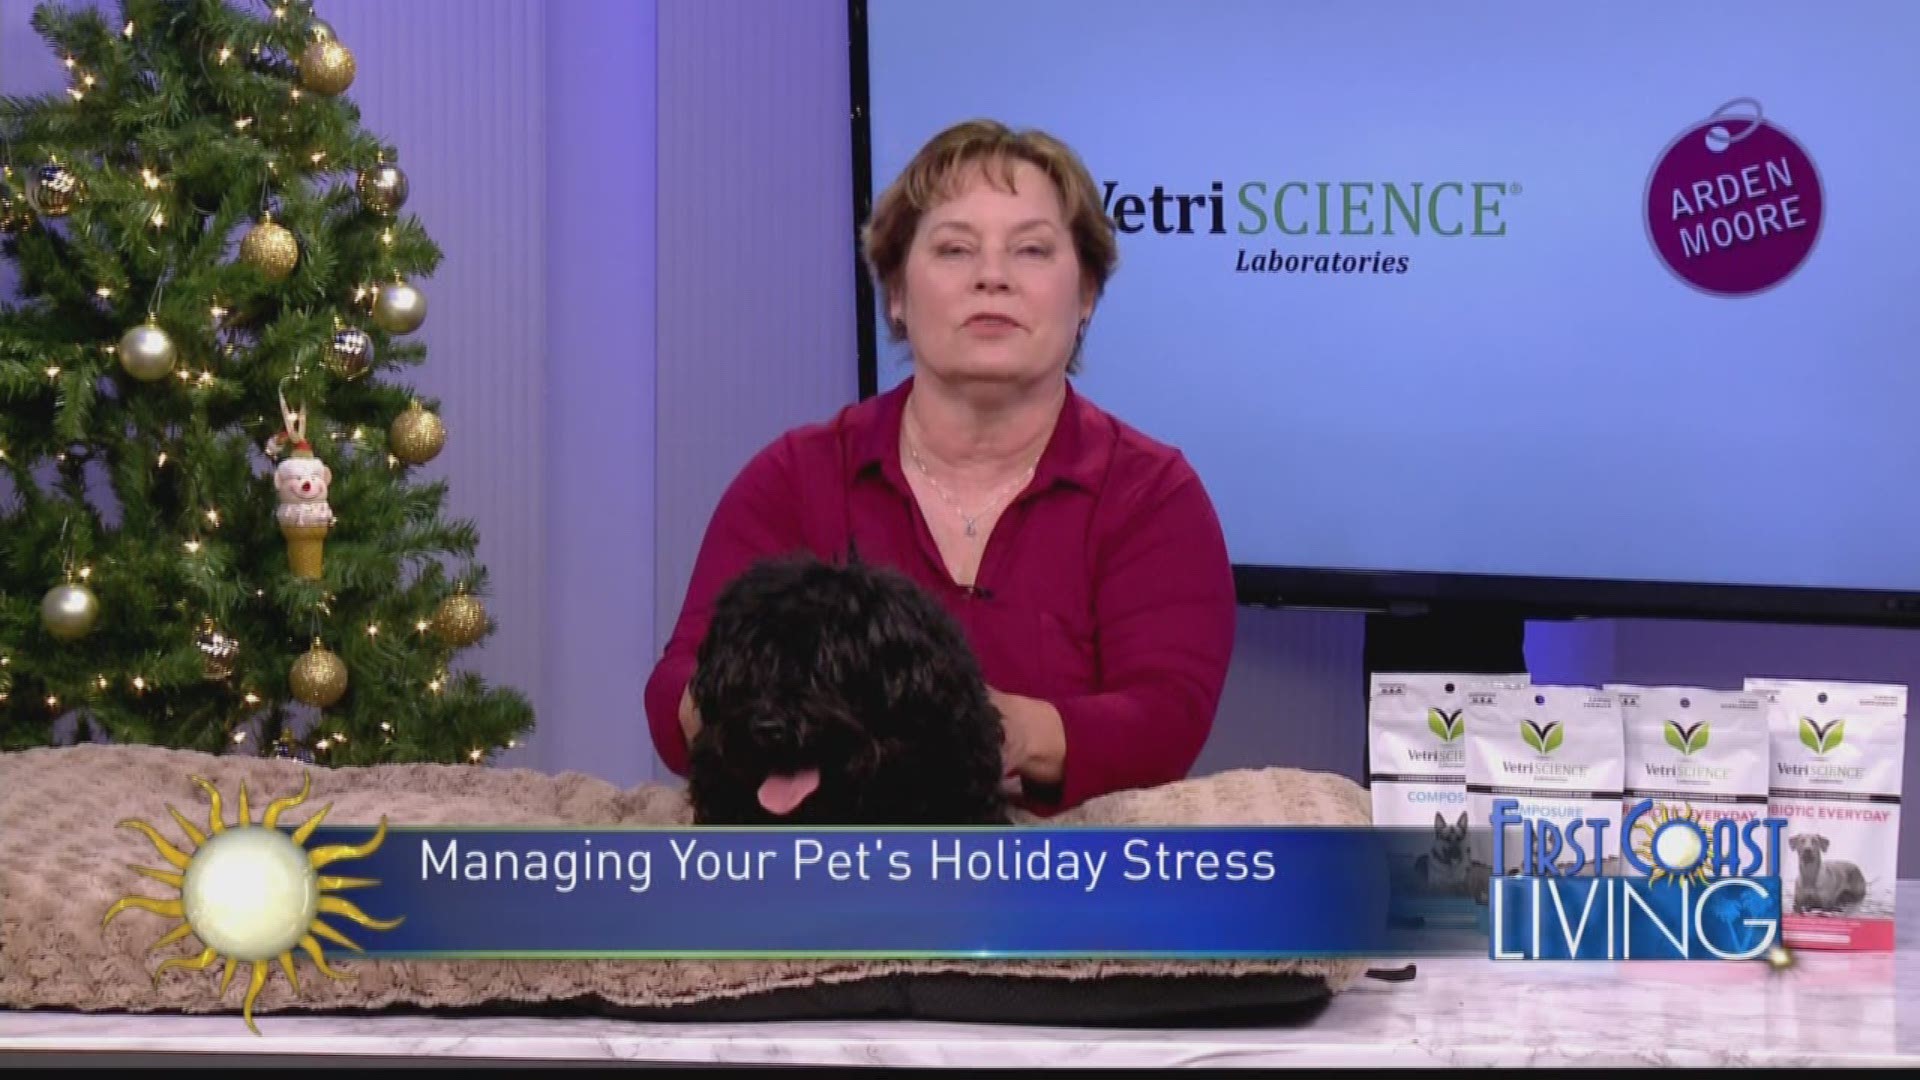 The lights, extra noise, and travel associated with the holidays can make for a very stressful time of year for our pets.